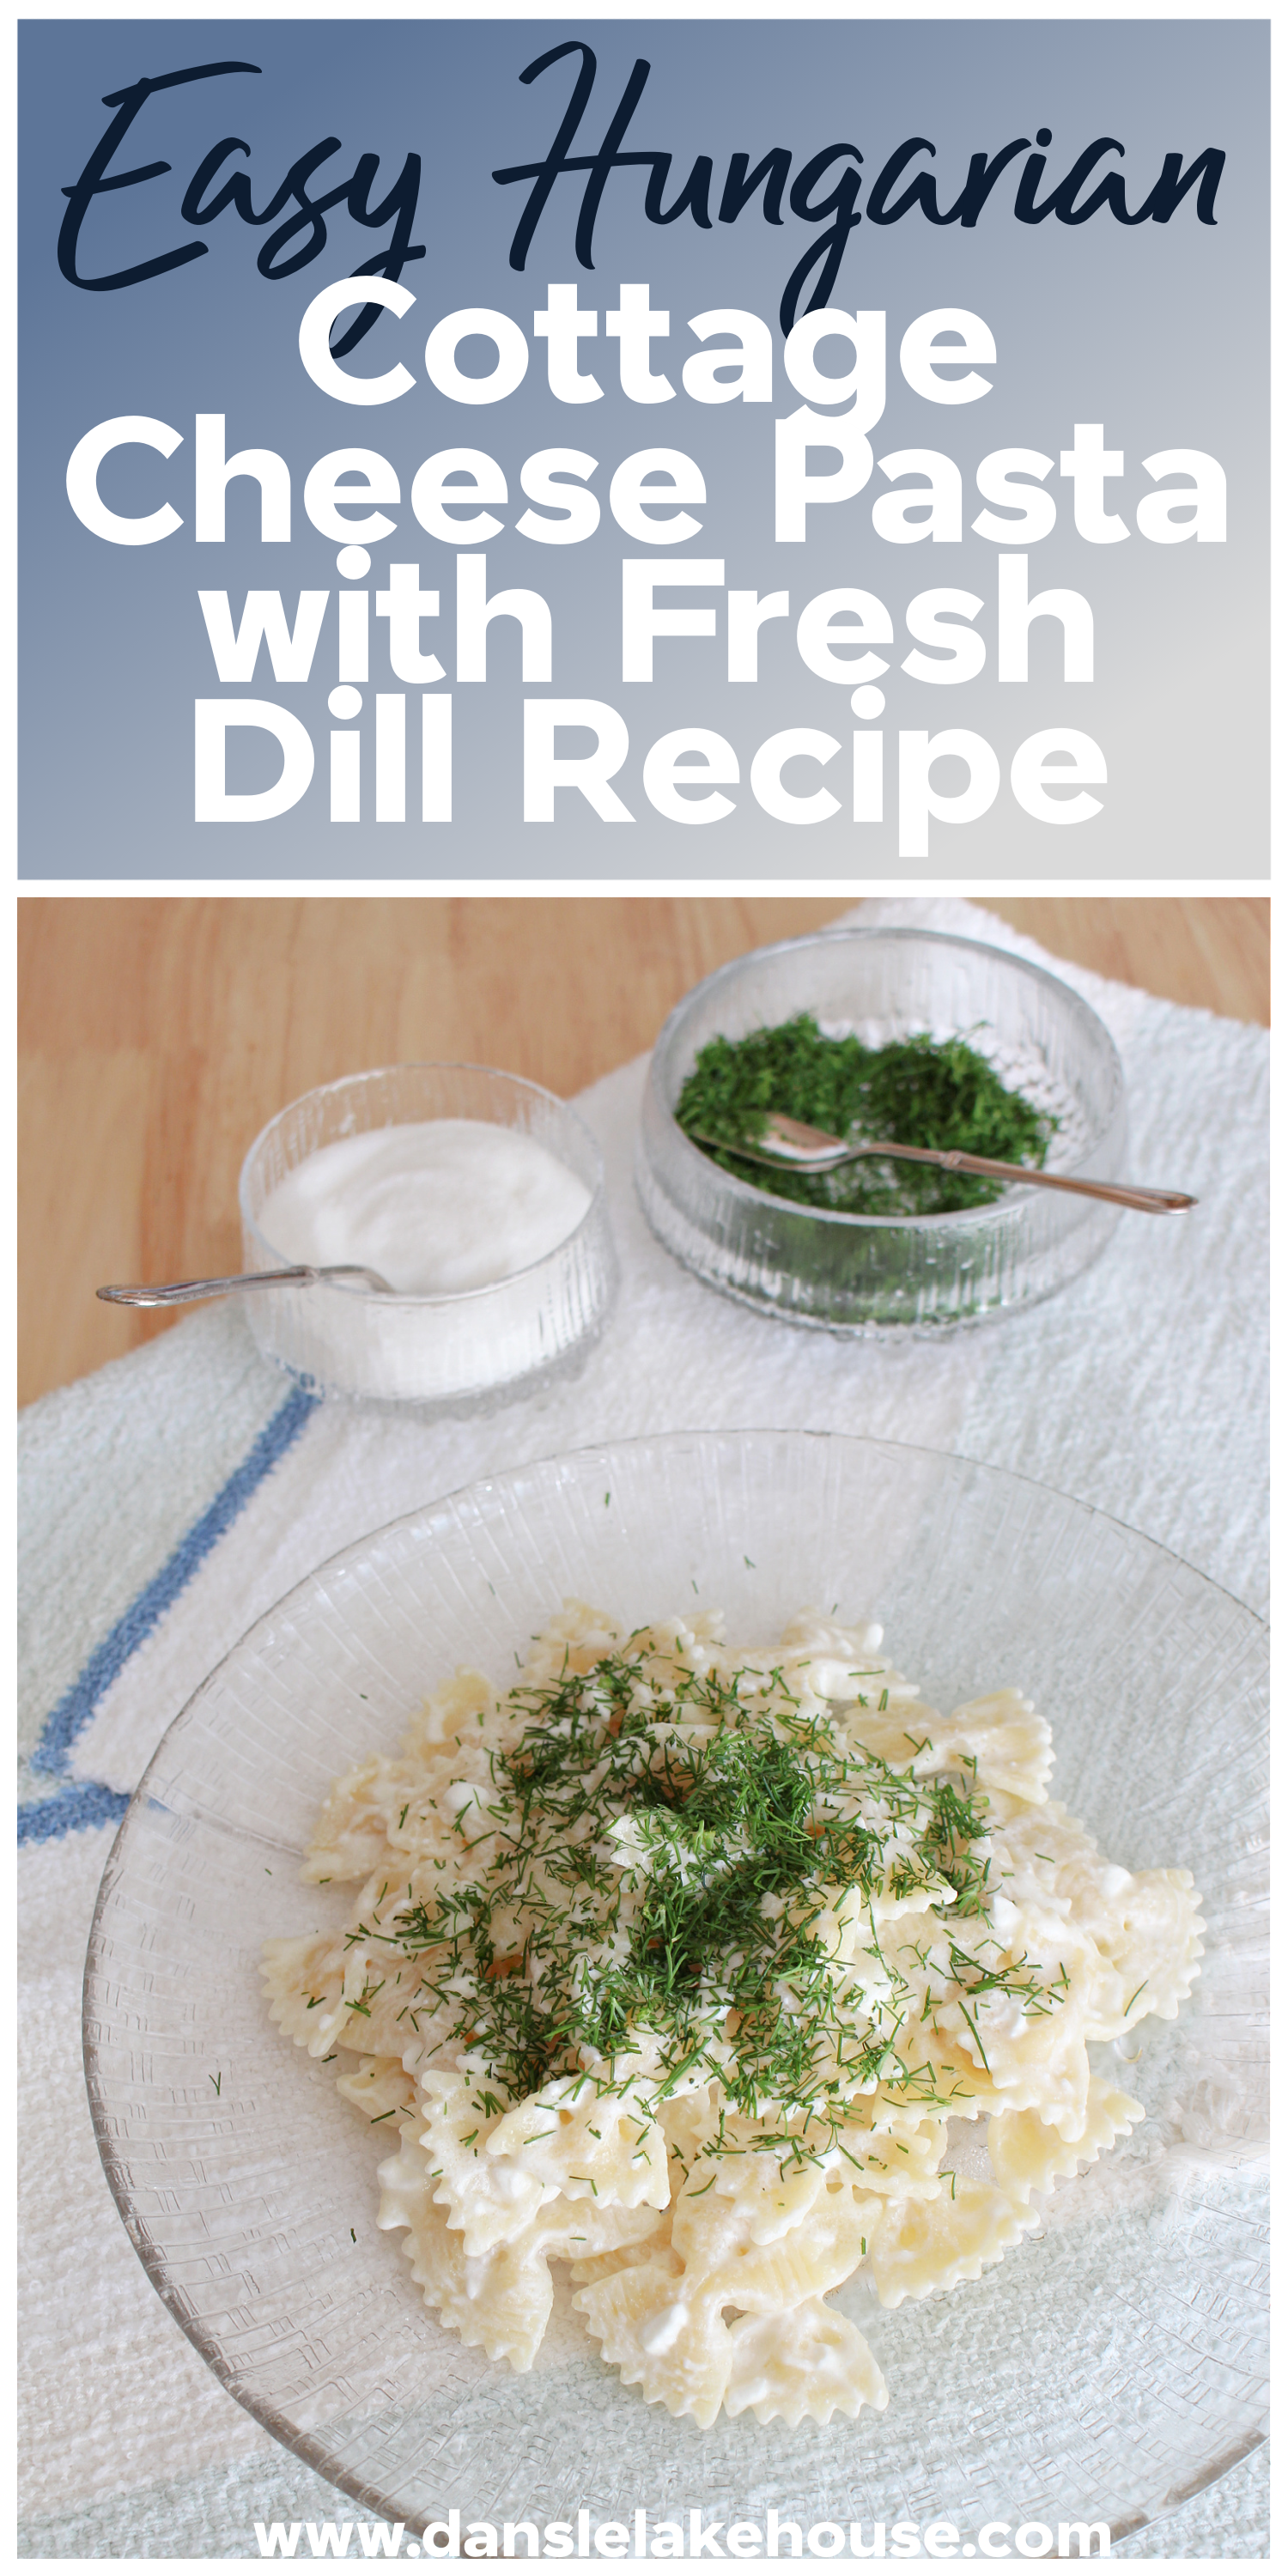 Fresh Dill Topped Paste Recipe - Easy Hungarian Cottage Cheese Pasta Recipe